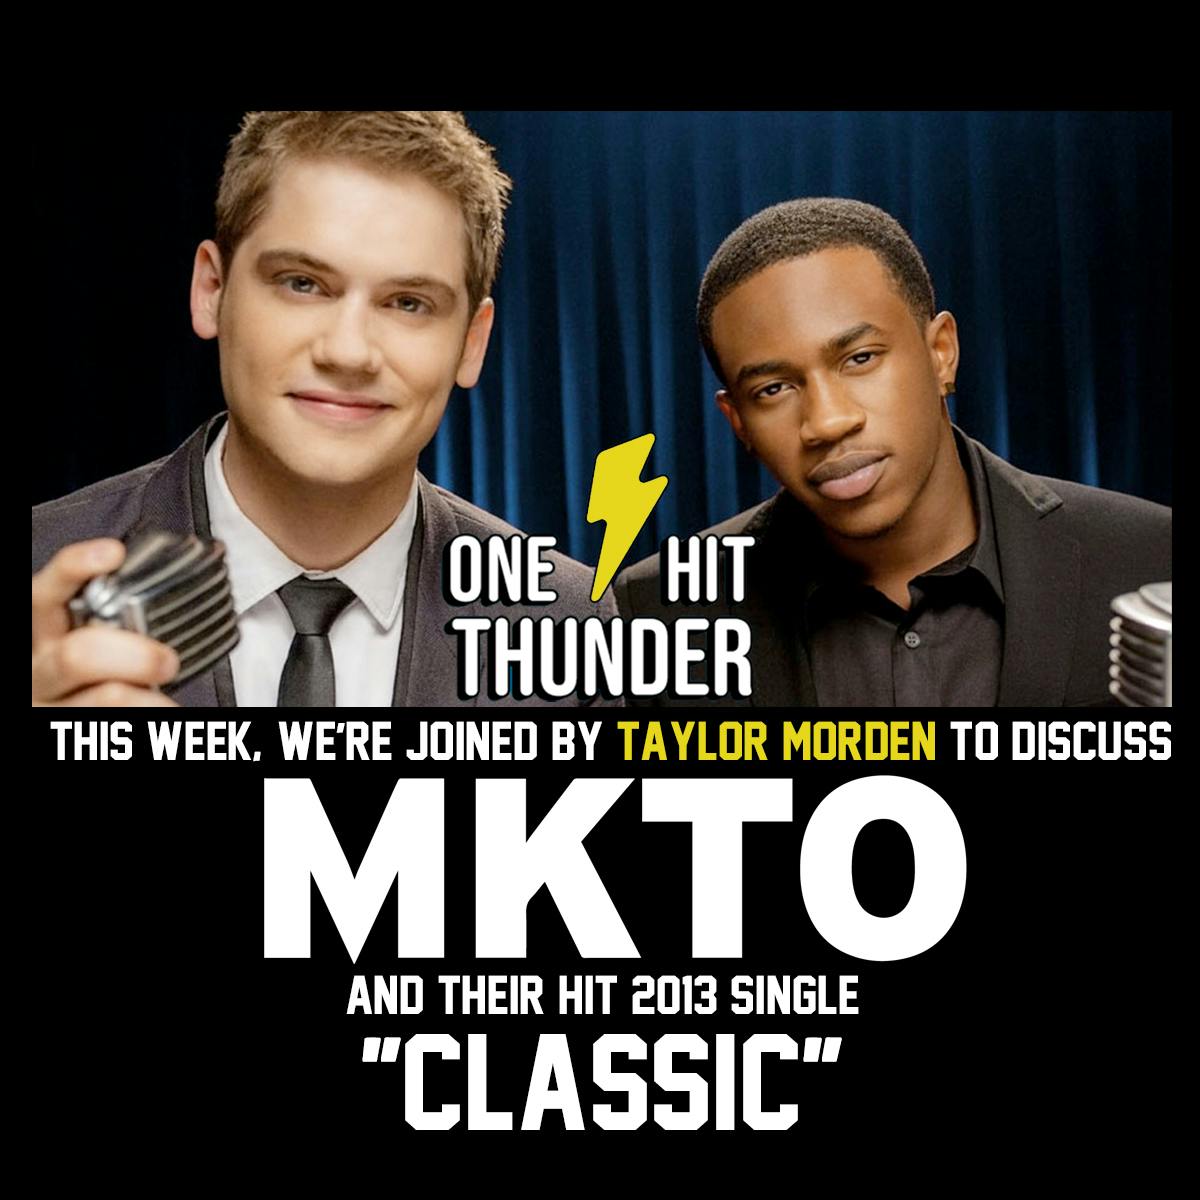 ”Classic” by MKTO (f/ Taylor Morden)